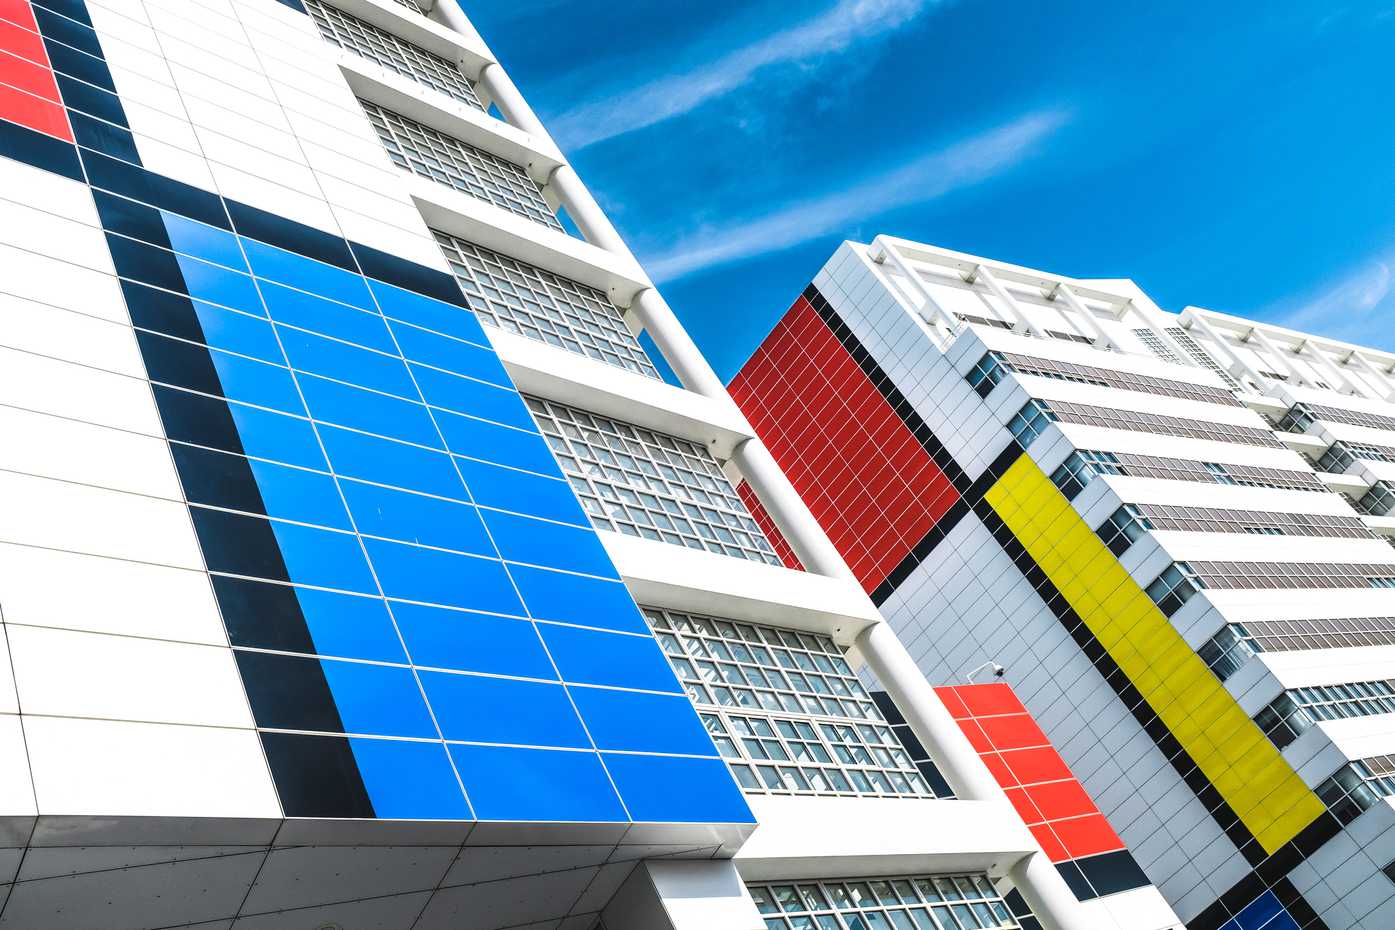 Mondrian decorations on Den Haag city hall and library